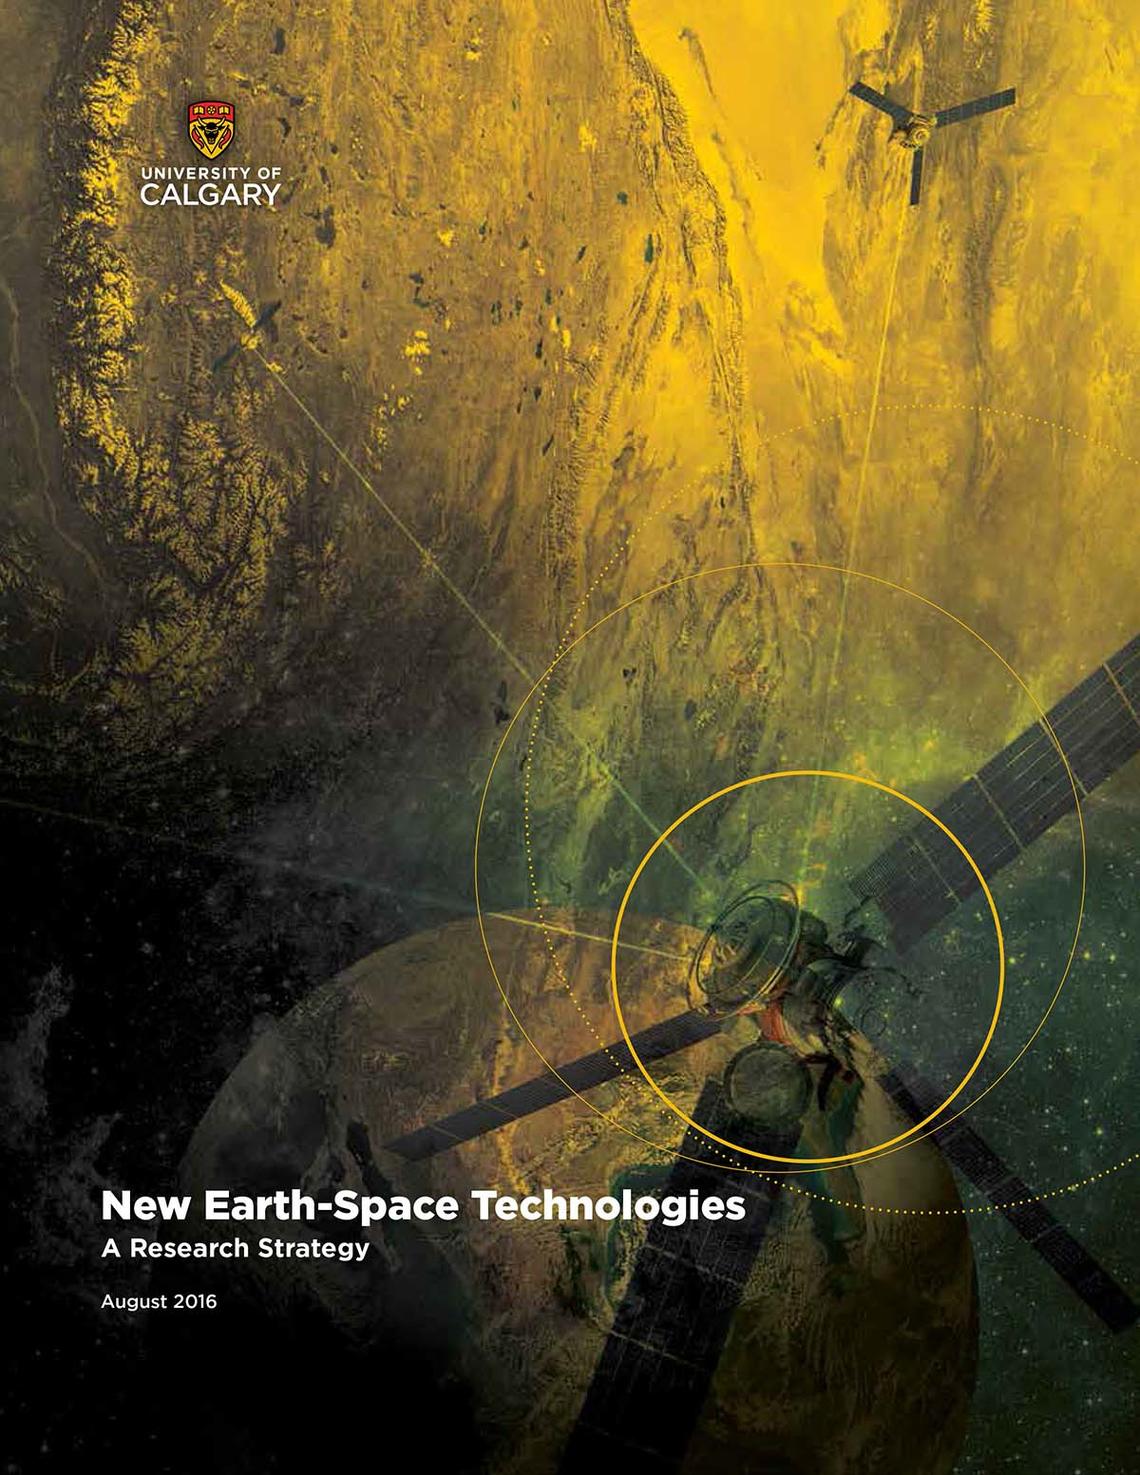 Download the New Earth-Space Technologies Research Strategy.